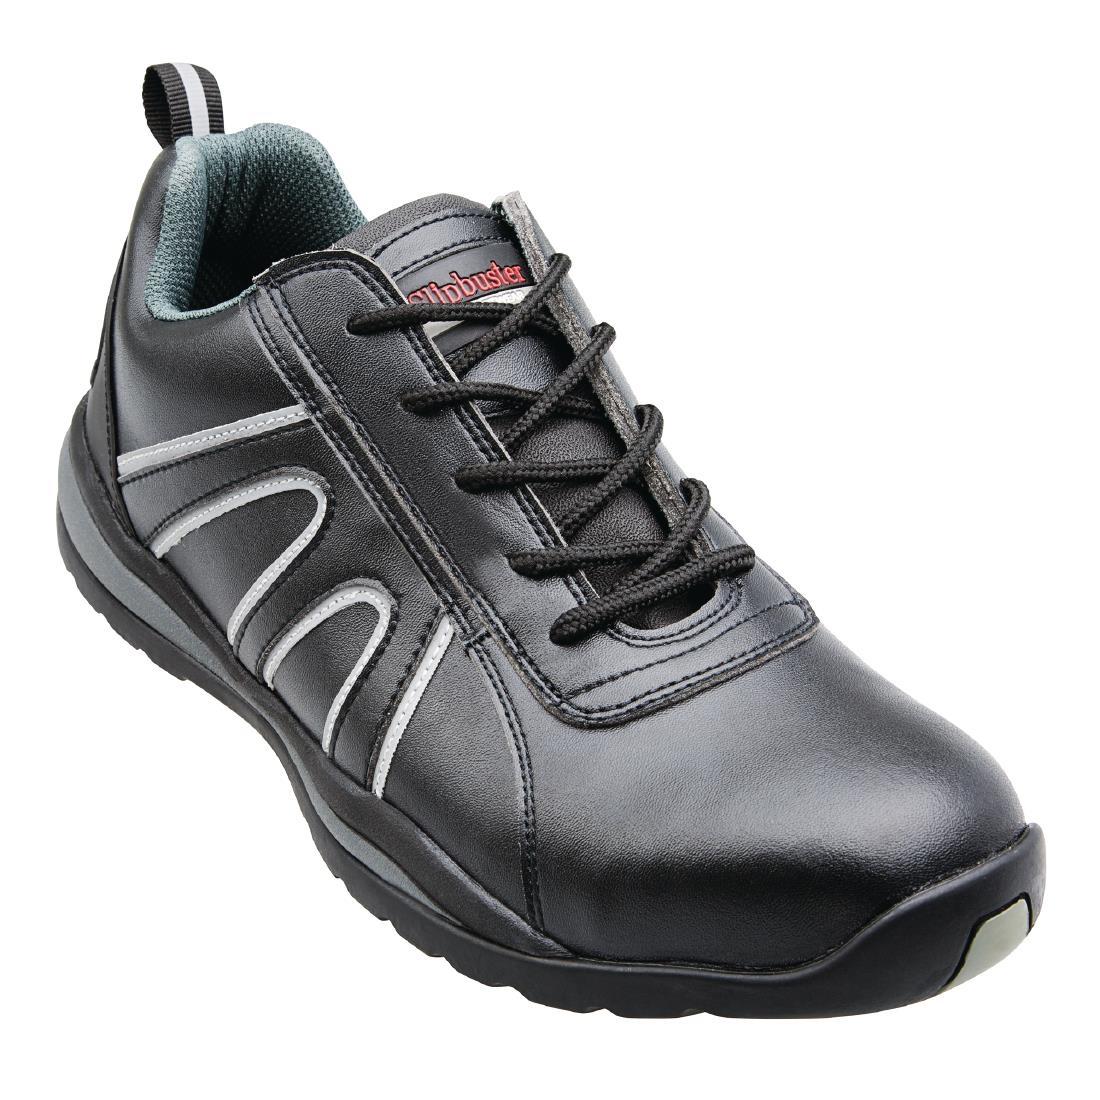 Slipbuster Safety Trainers Black 46 - A708-46  - 6